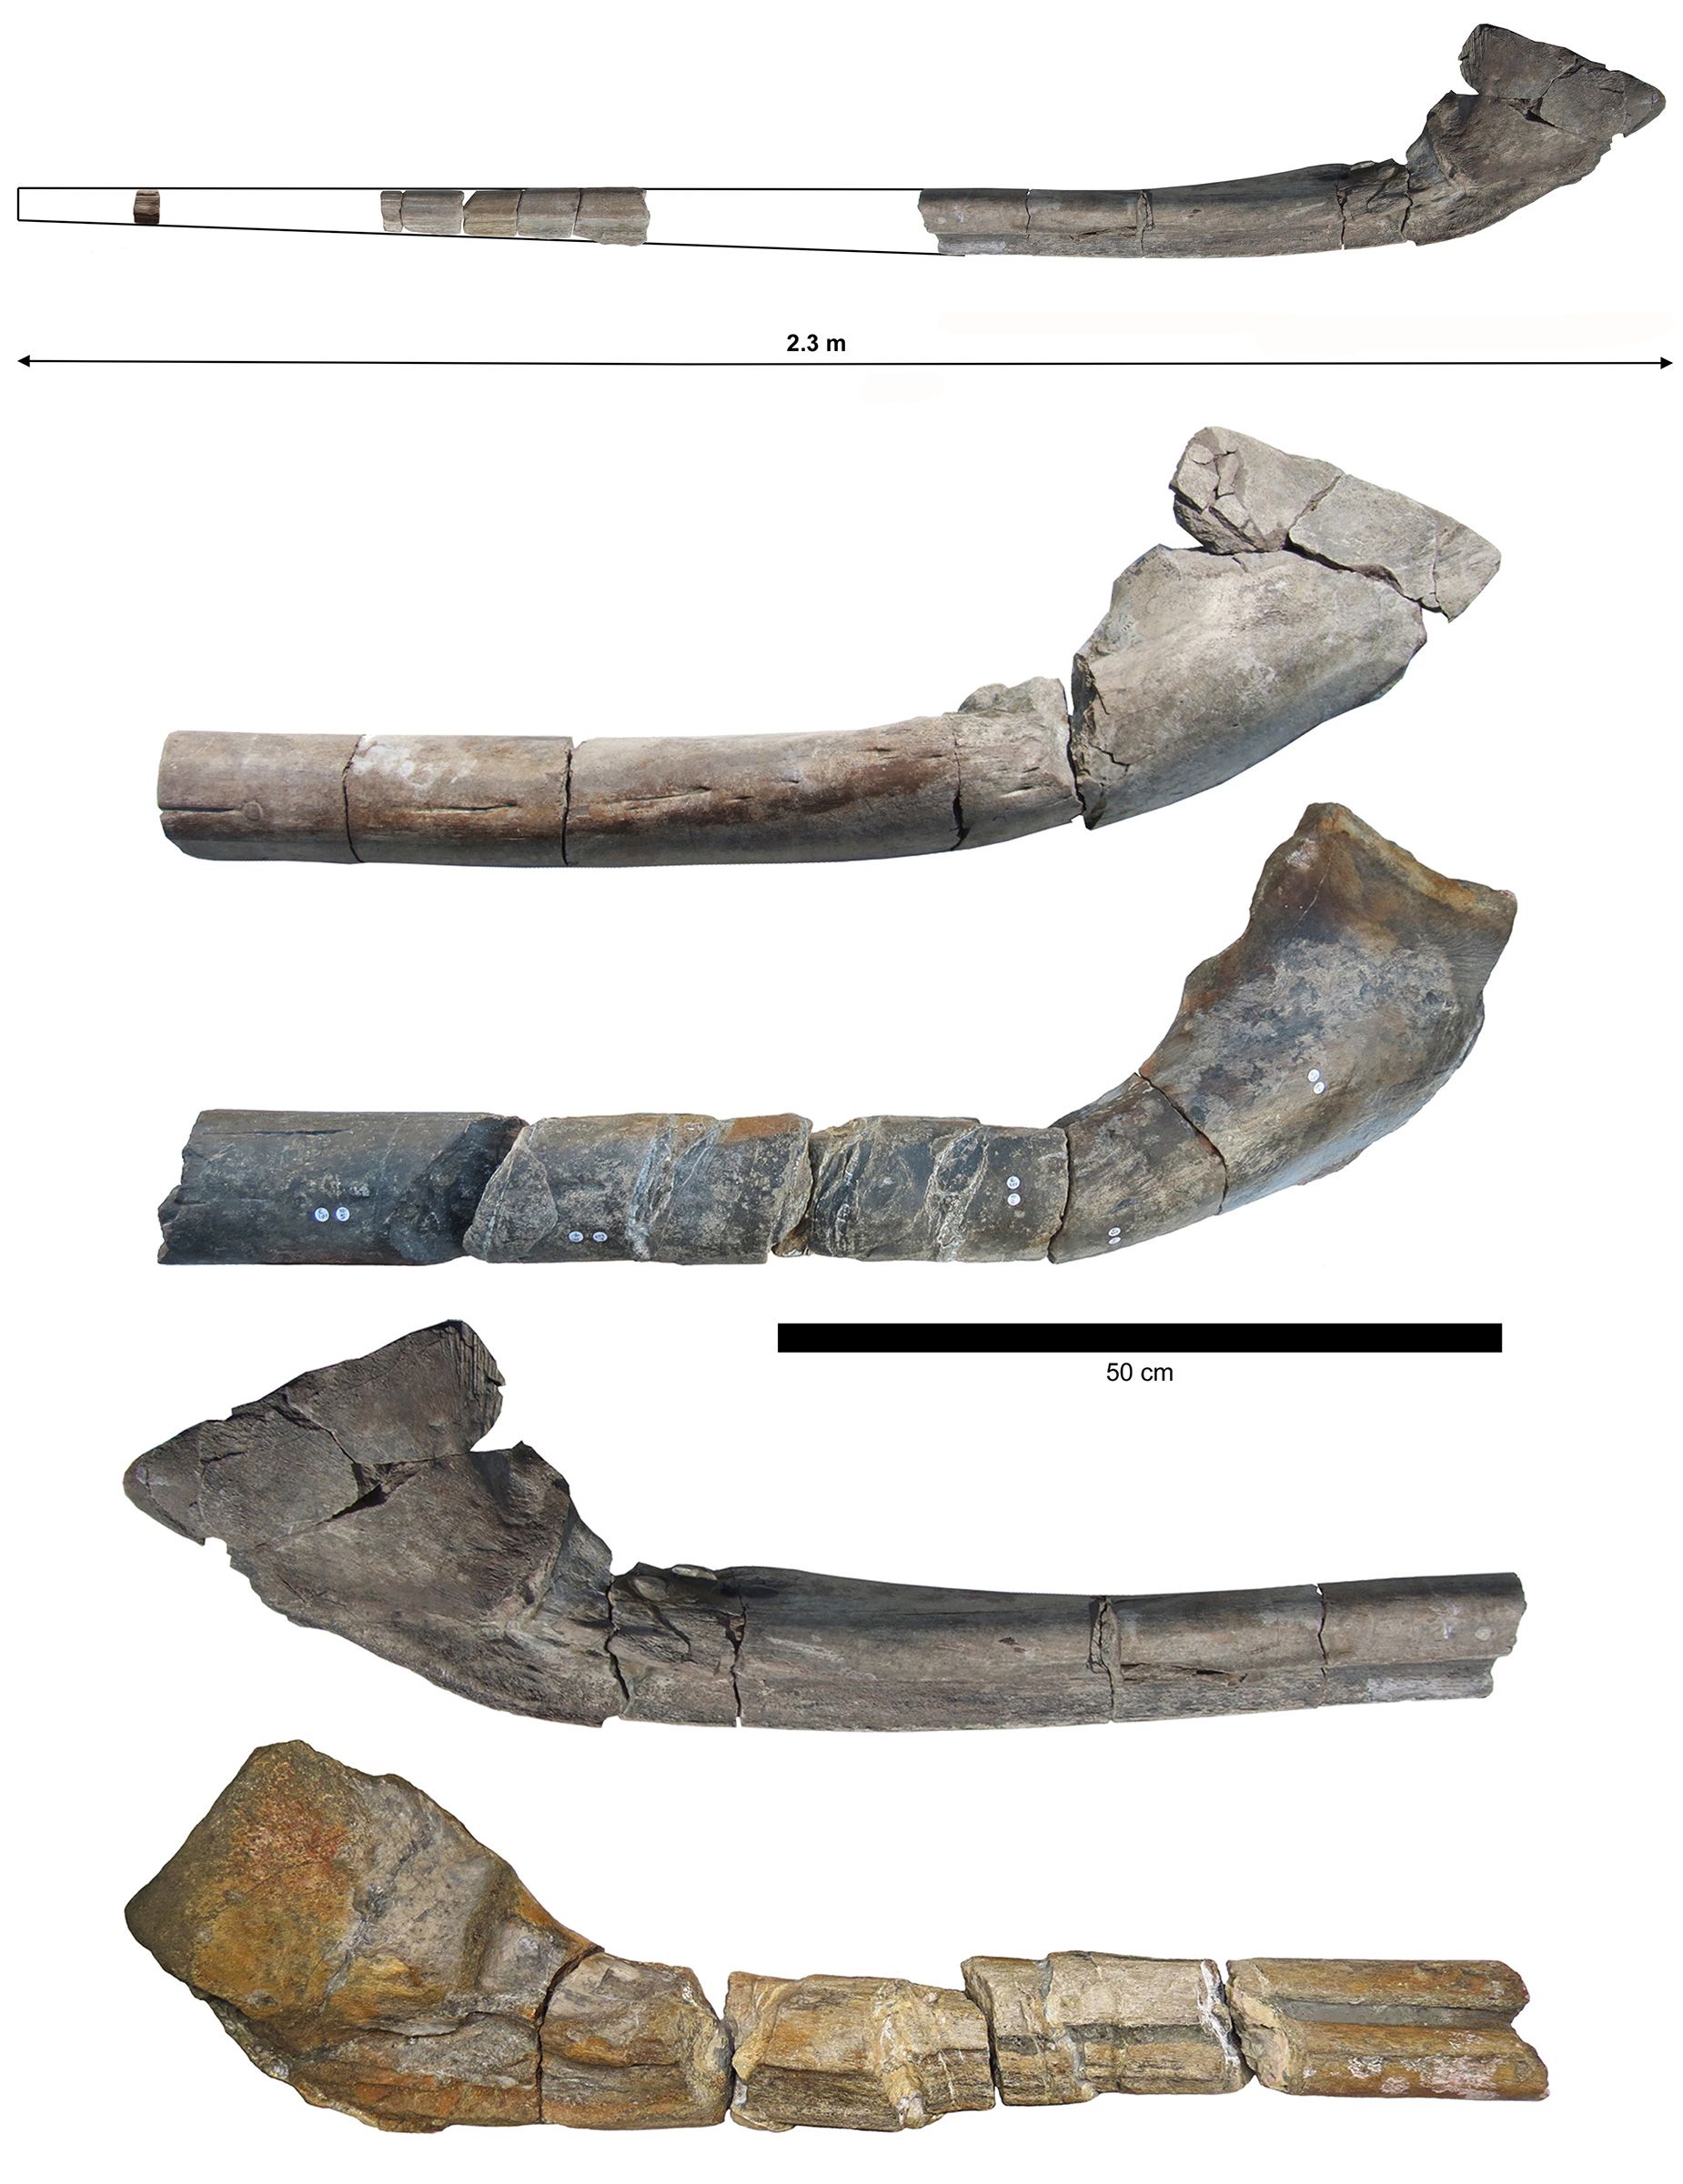 The nearly complete giant jawbone is shown along with the jawbone (middle and bottom) found by Paul...